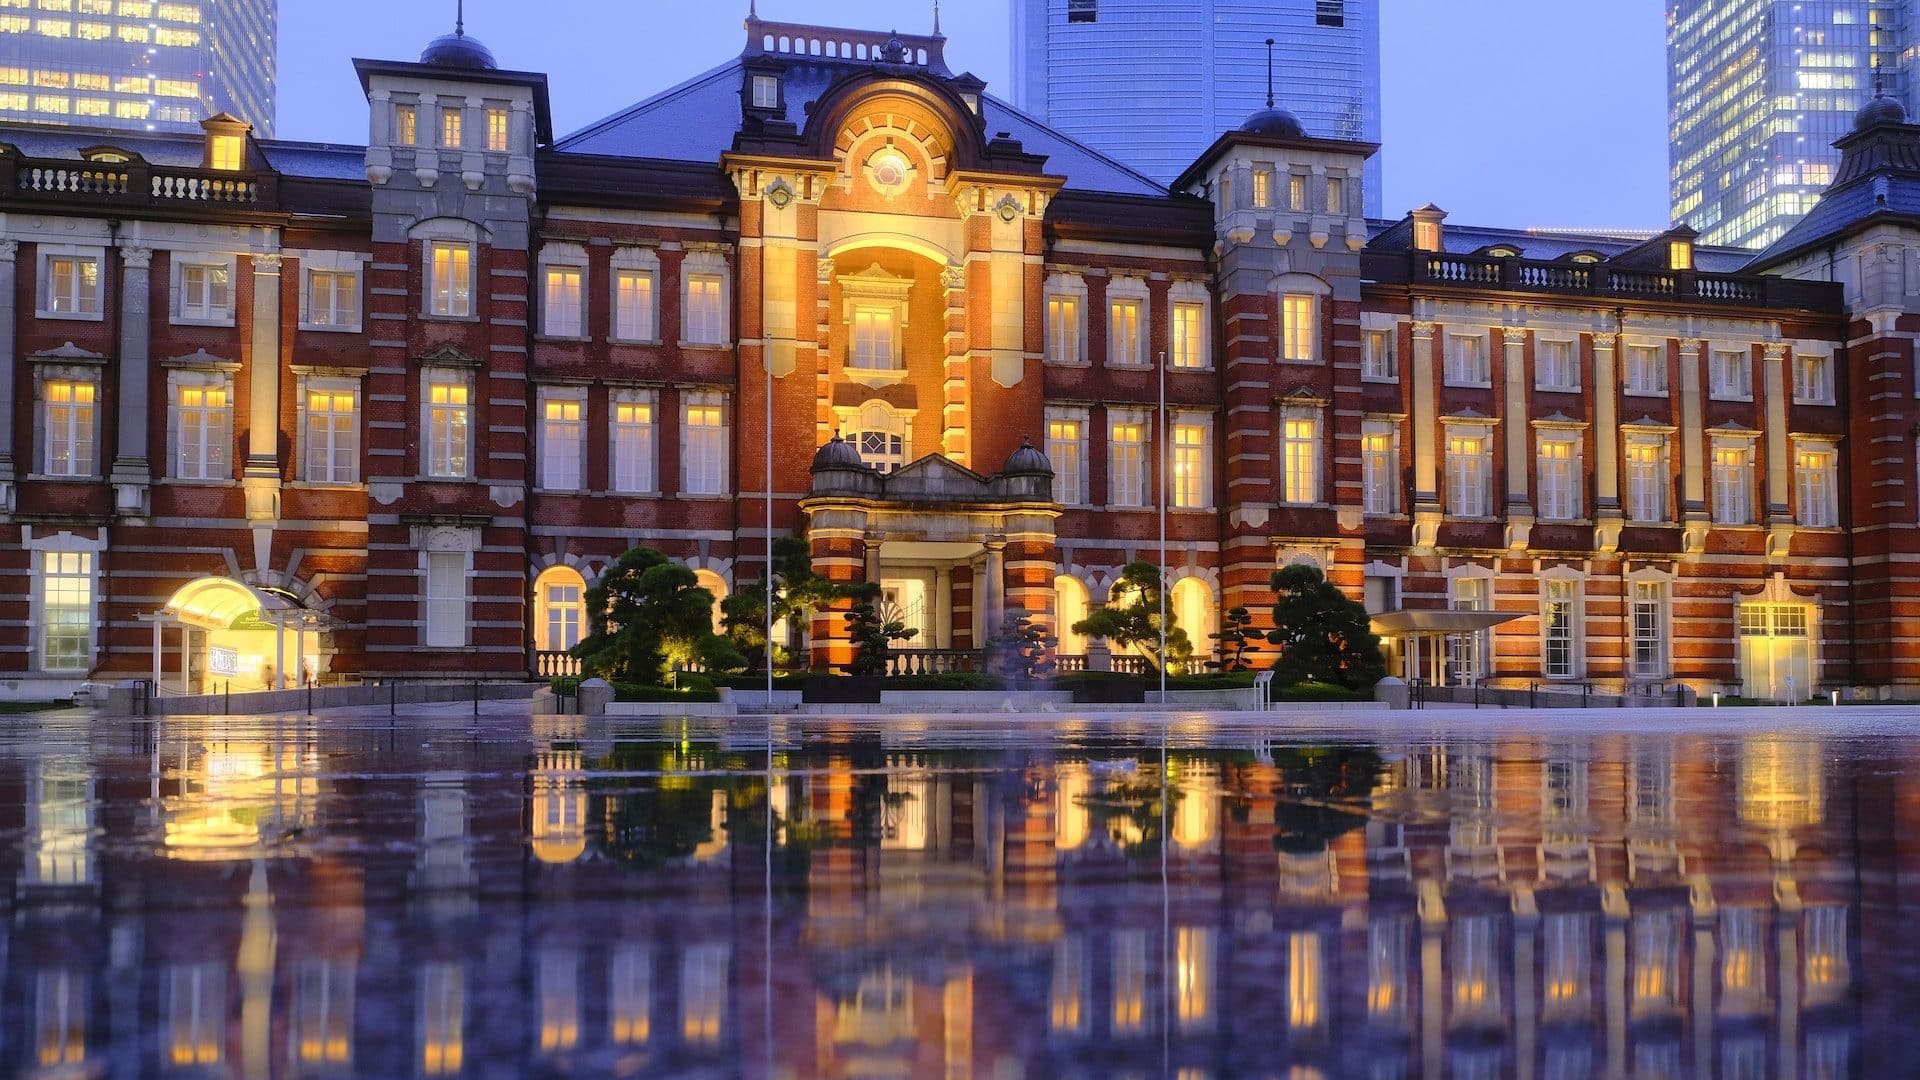 Tokyo Station is one of the city's important historical buildings